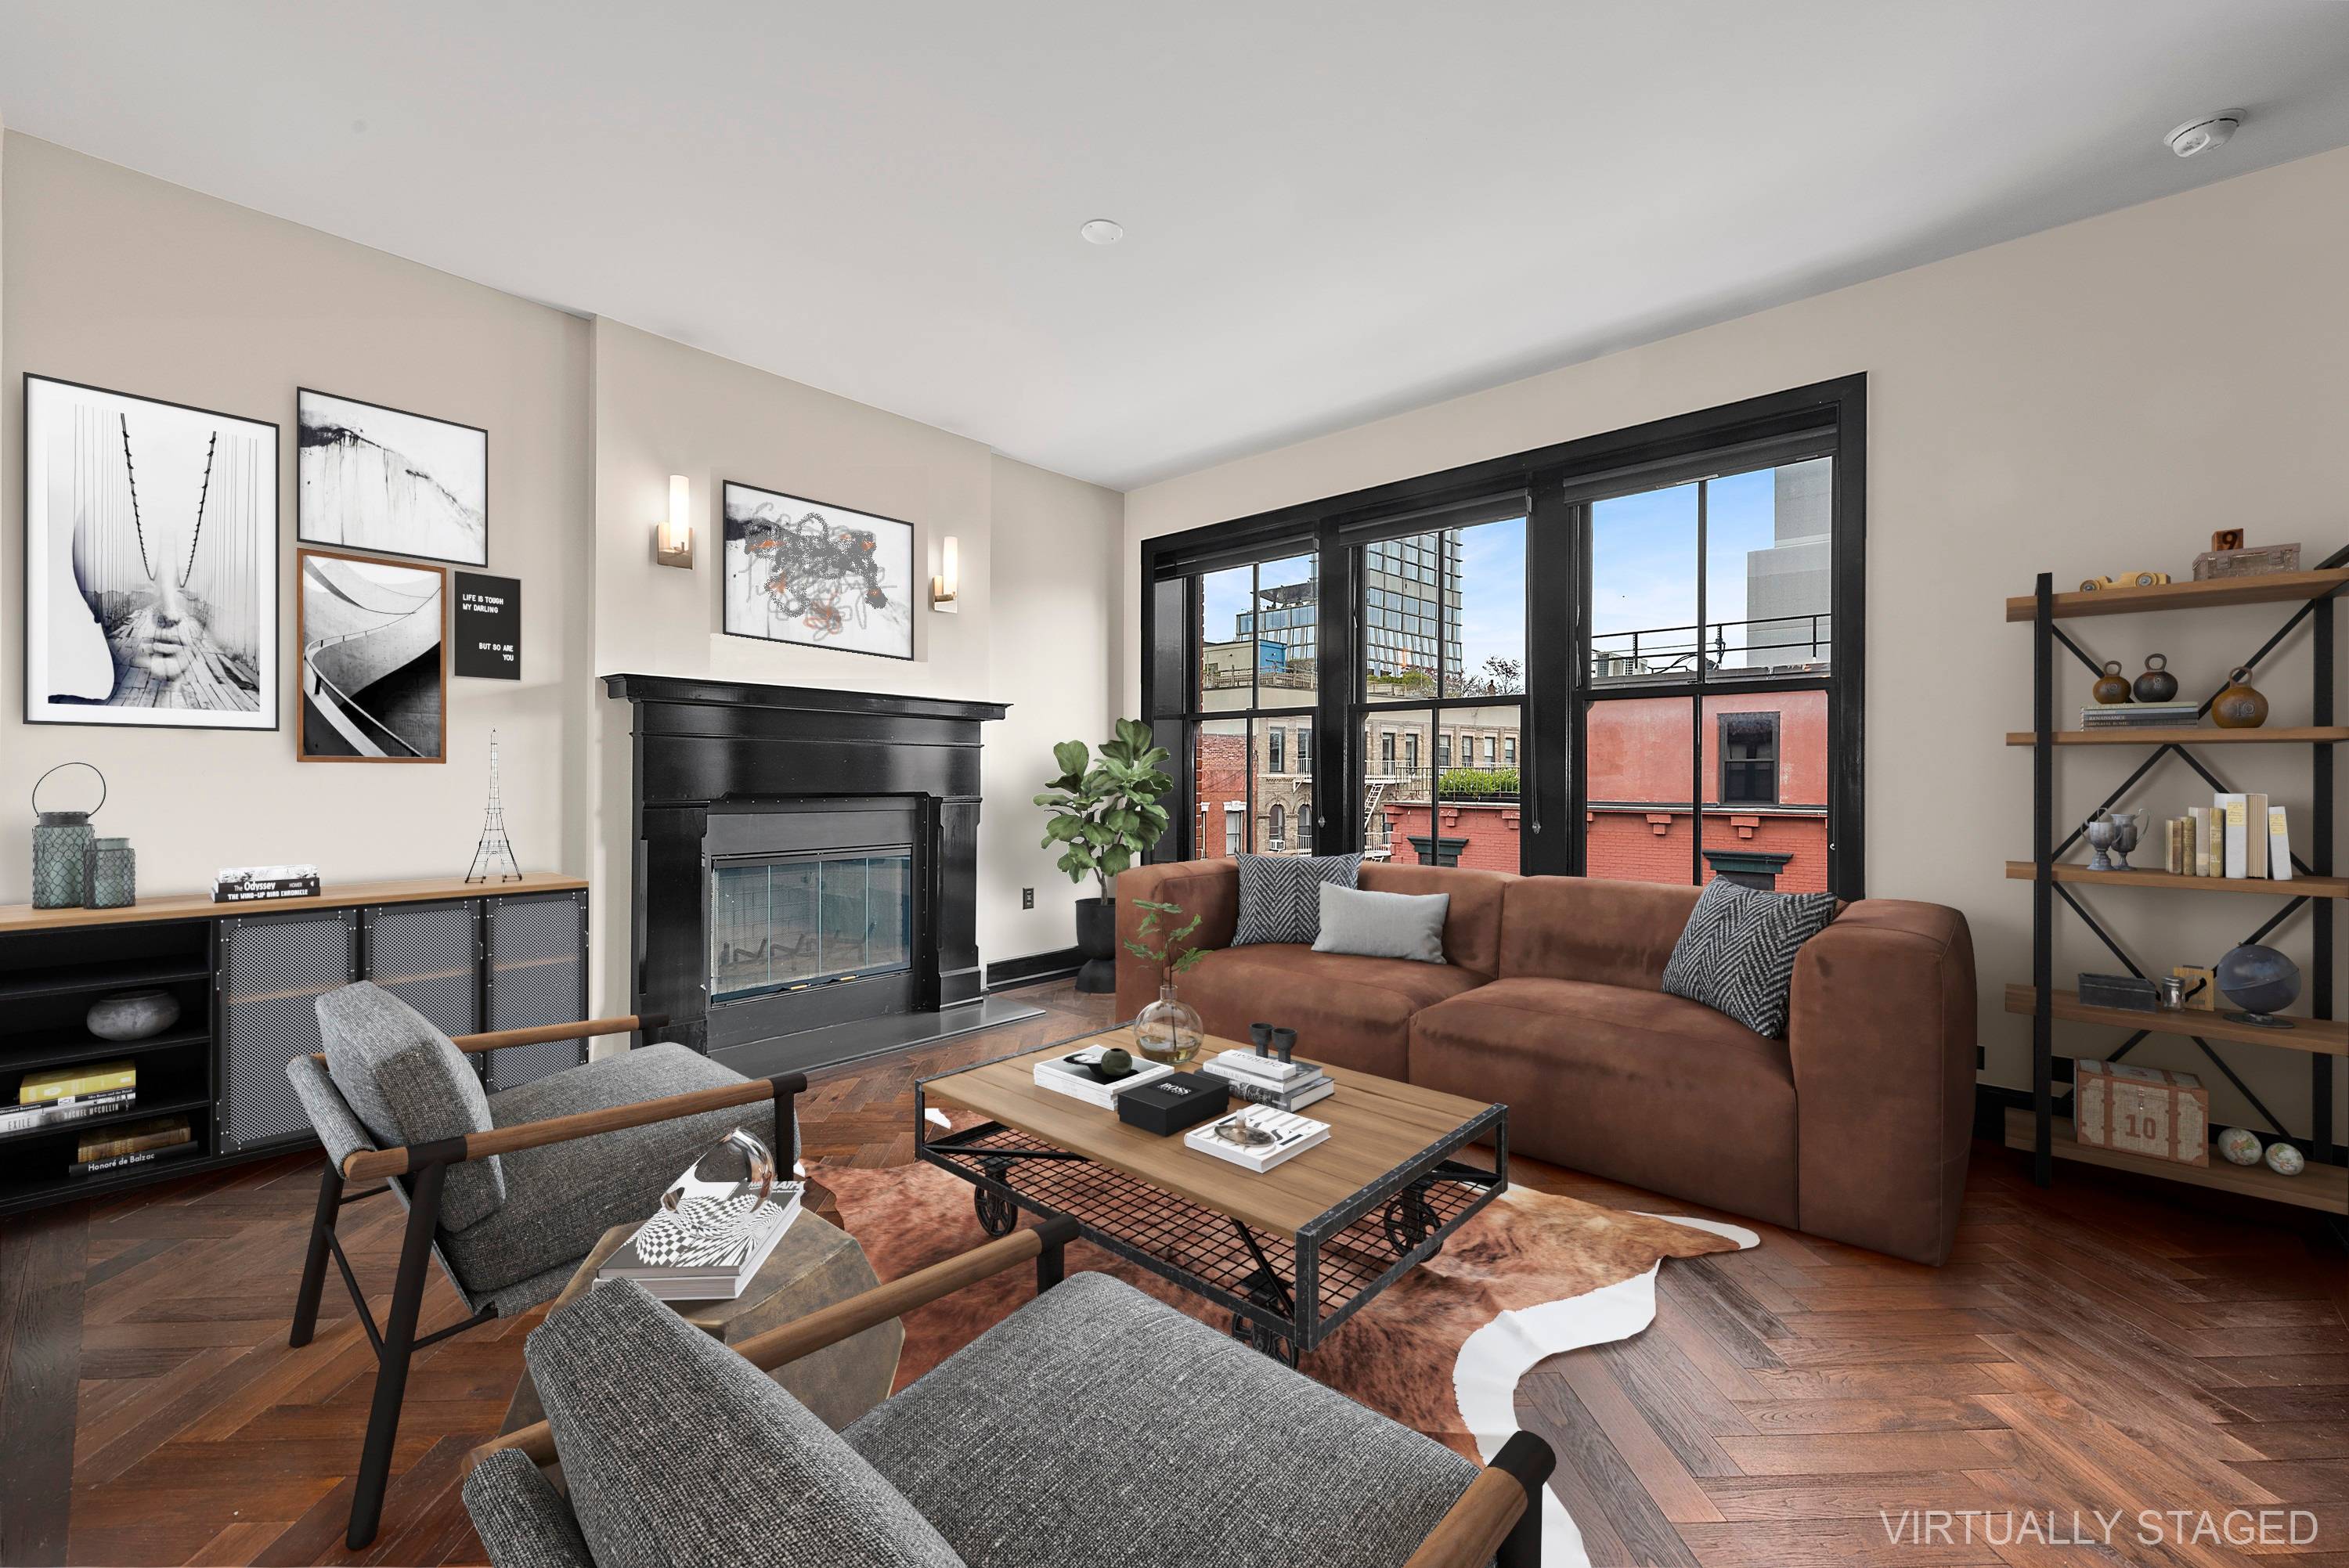 A rare one of a kind offering is now available at 211 Elizabeth Street, a bespoke, boutique 15 unit condominium located on the corner of Elizabeth and Prince Streets, the ...